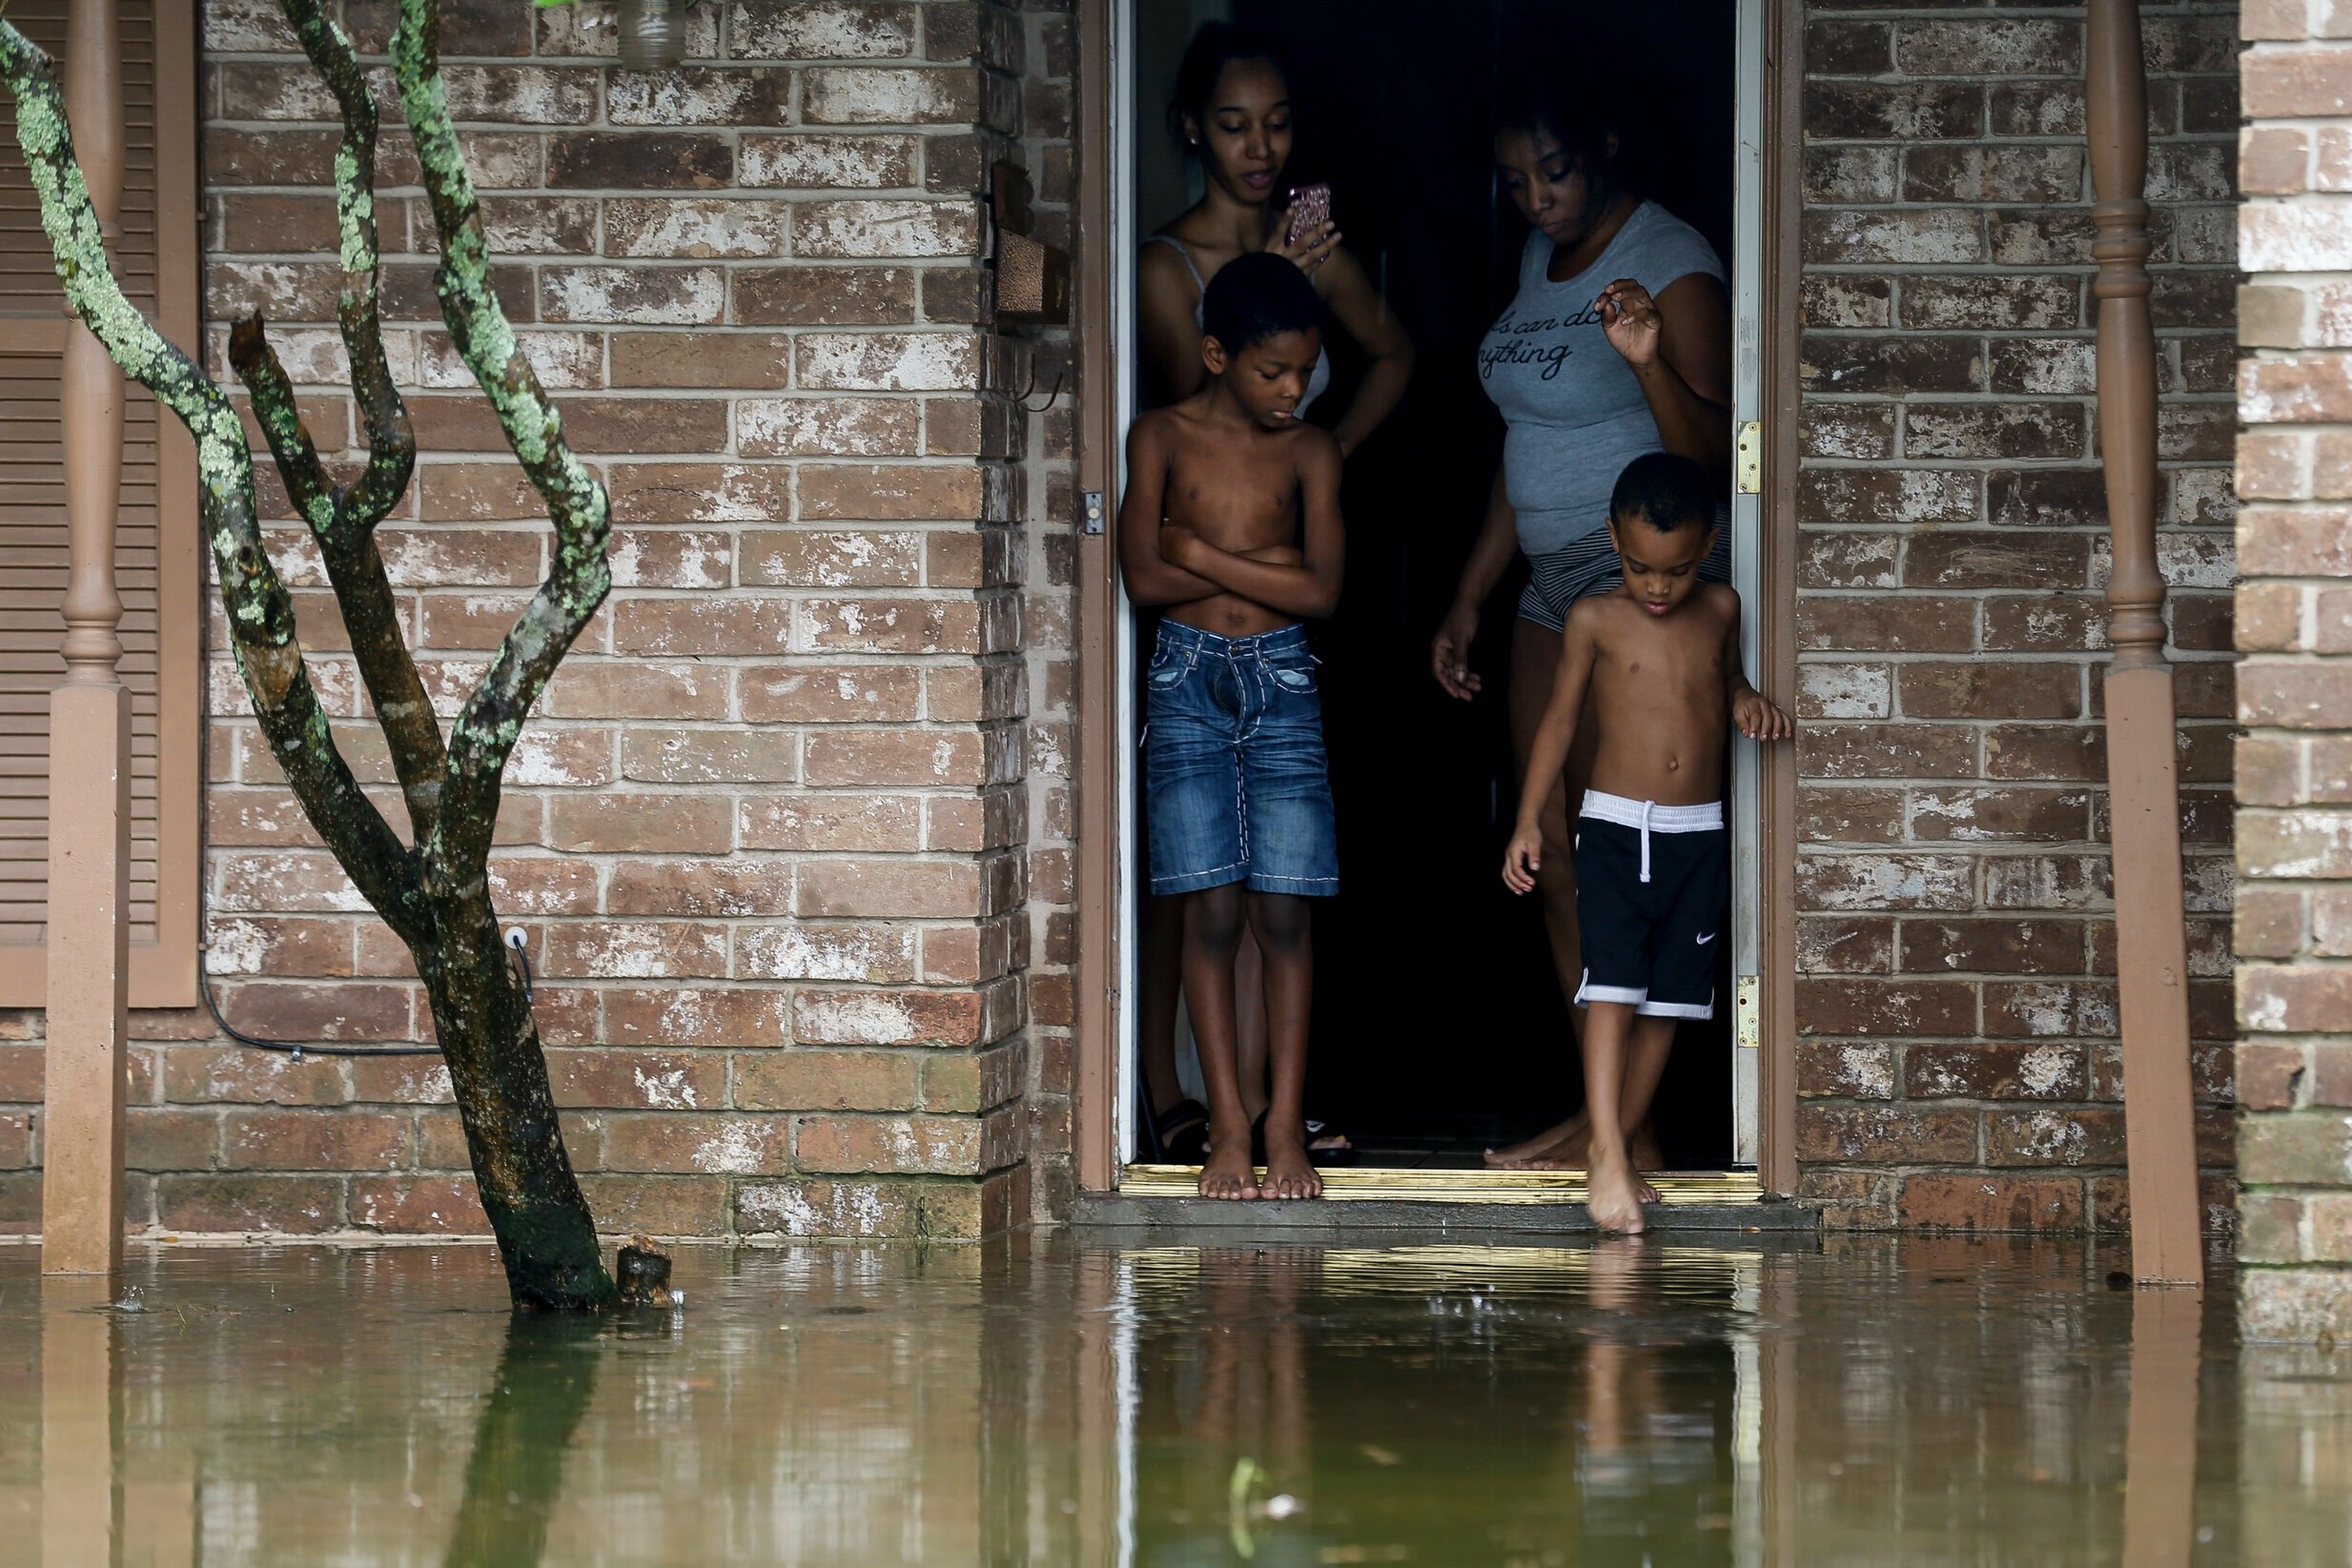  Eight-year-old Cam'ron Maltie, left, and Adrian Murray, 4, look at the their flooded front lawn during Tropical Storm Beta on Tuesday, Sept. 22, 2020, in Houston, Texas. Their family has been living in the home for a year, and didn't know the neighb